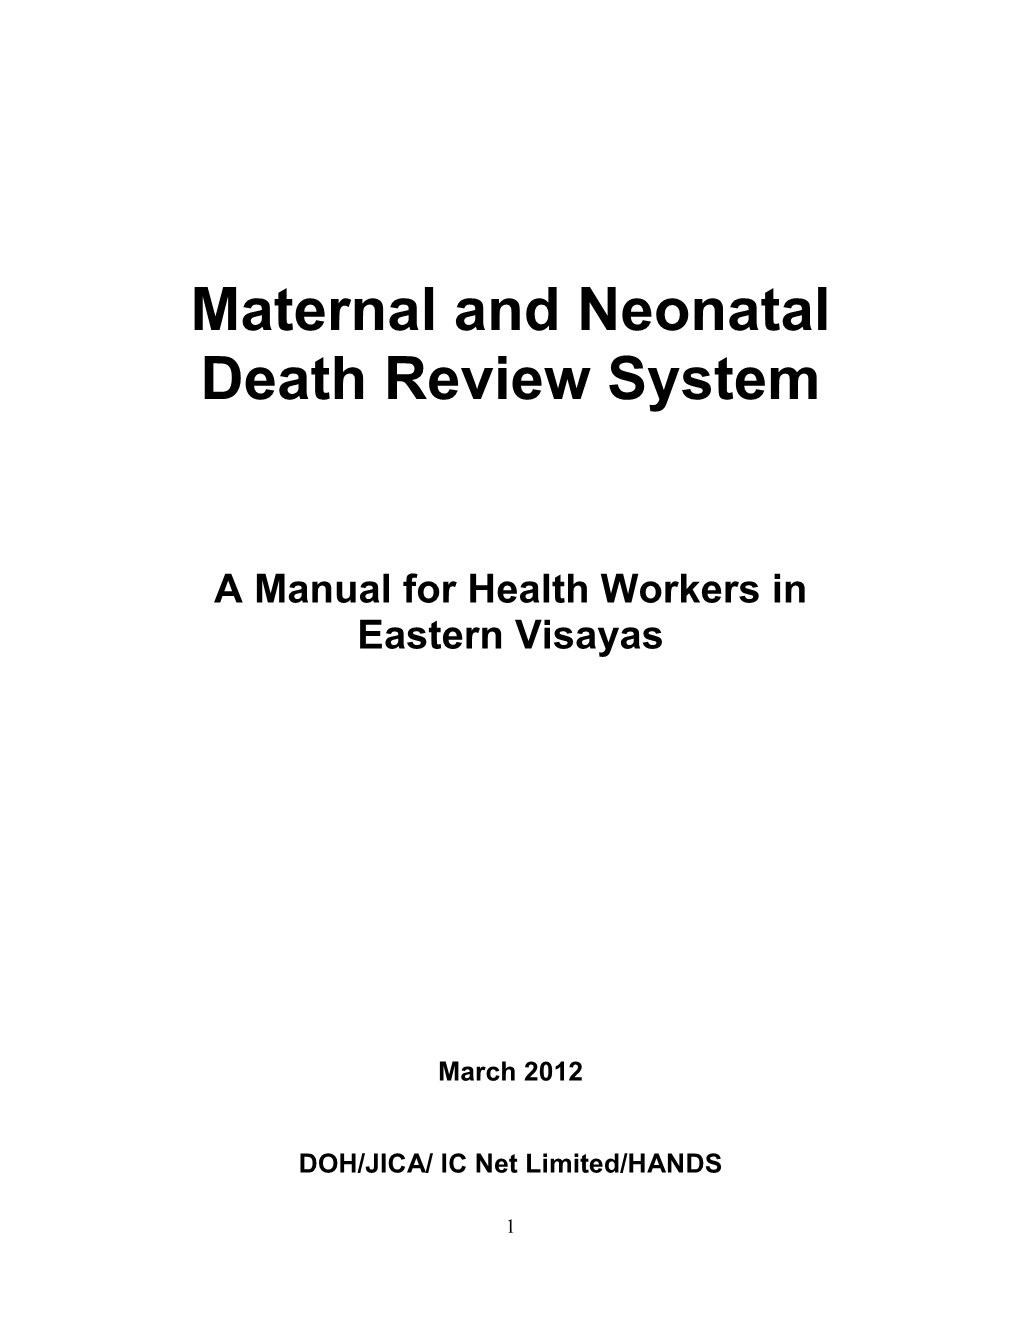 Maternal and Neonatal Death Review System